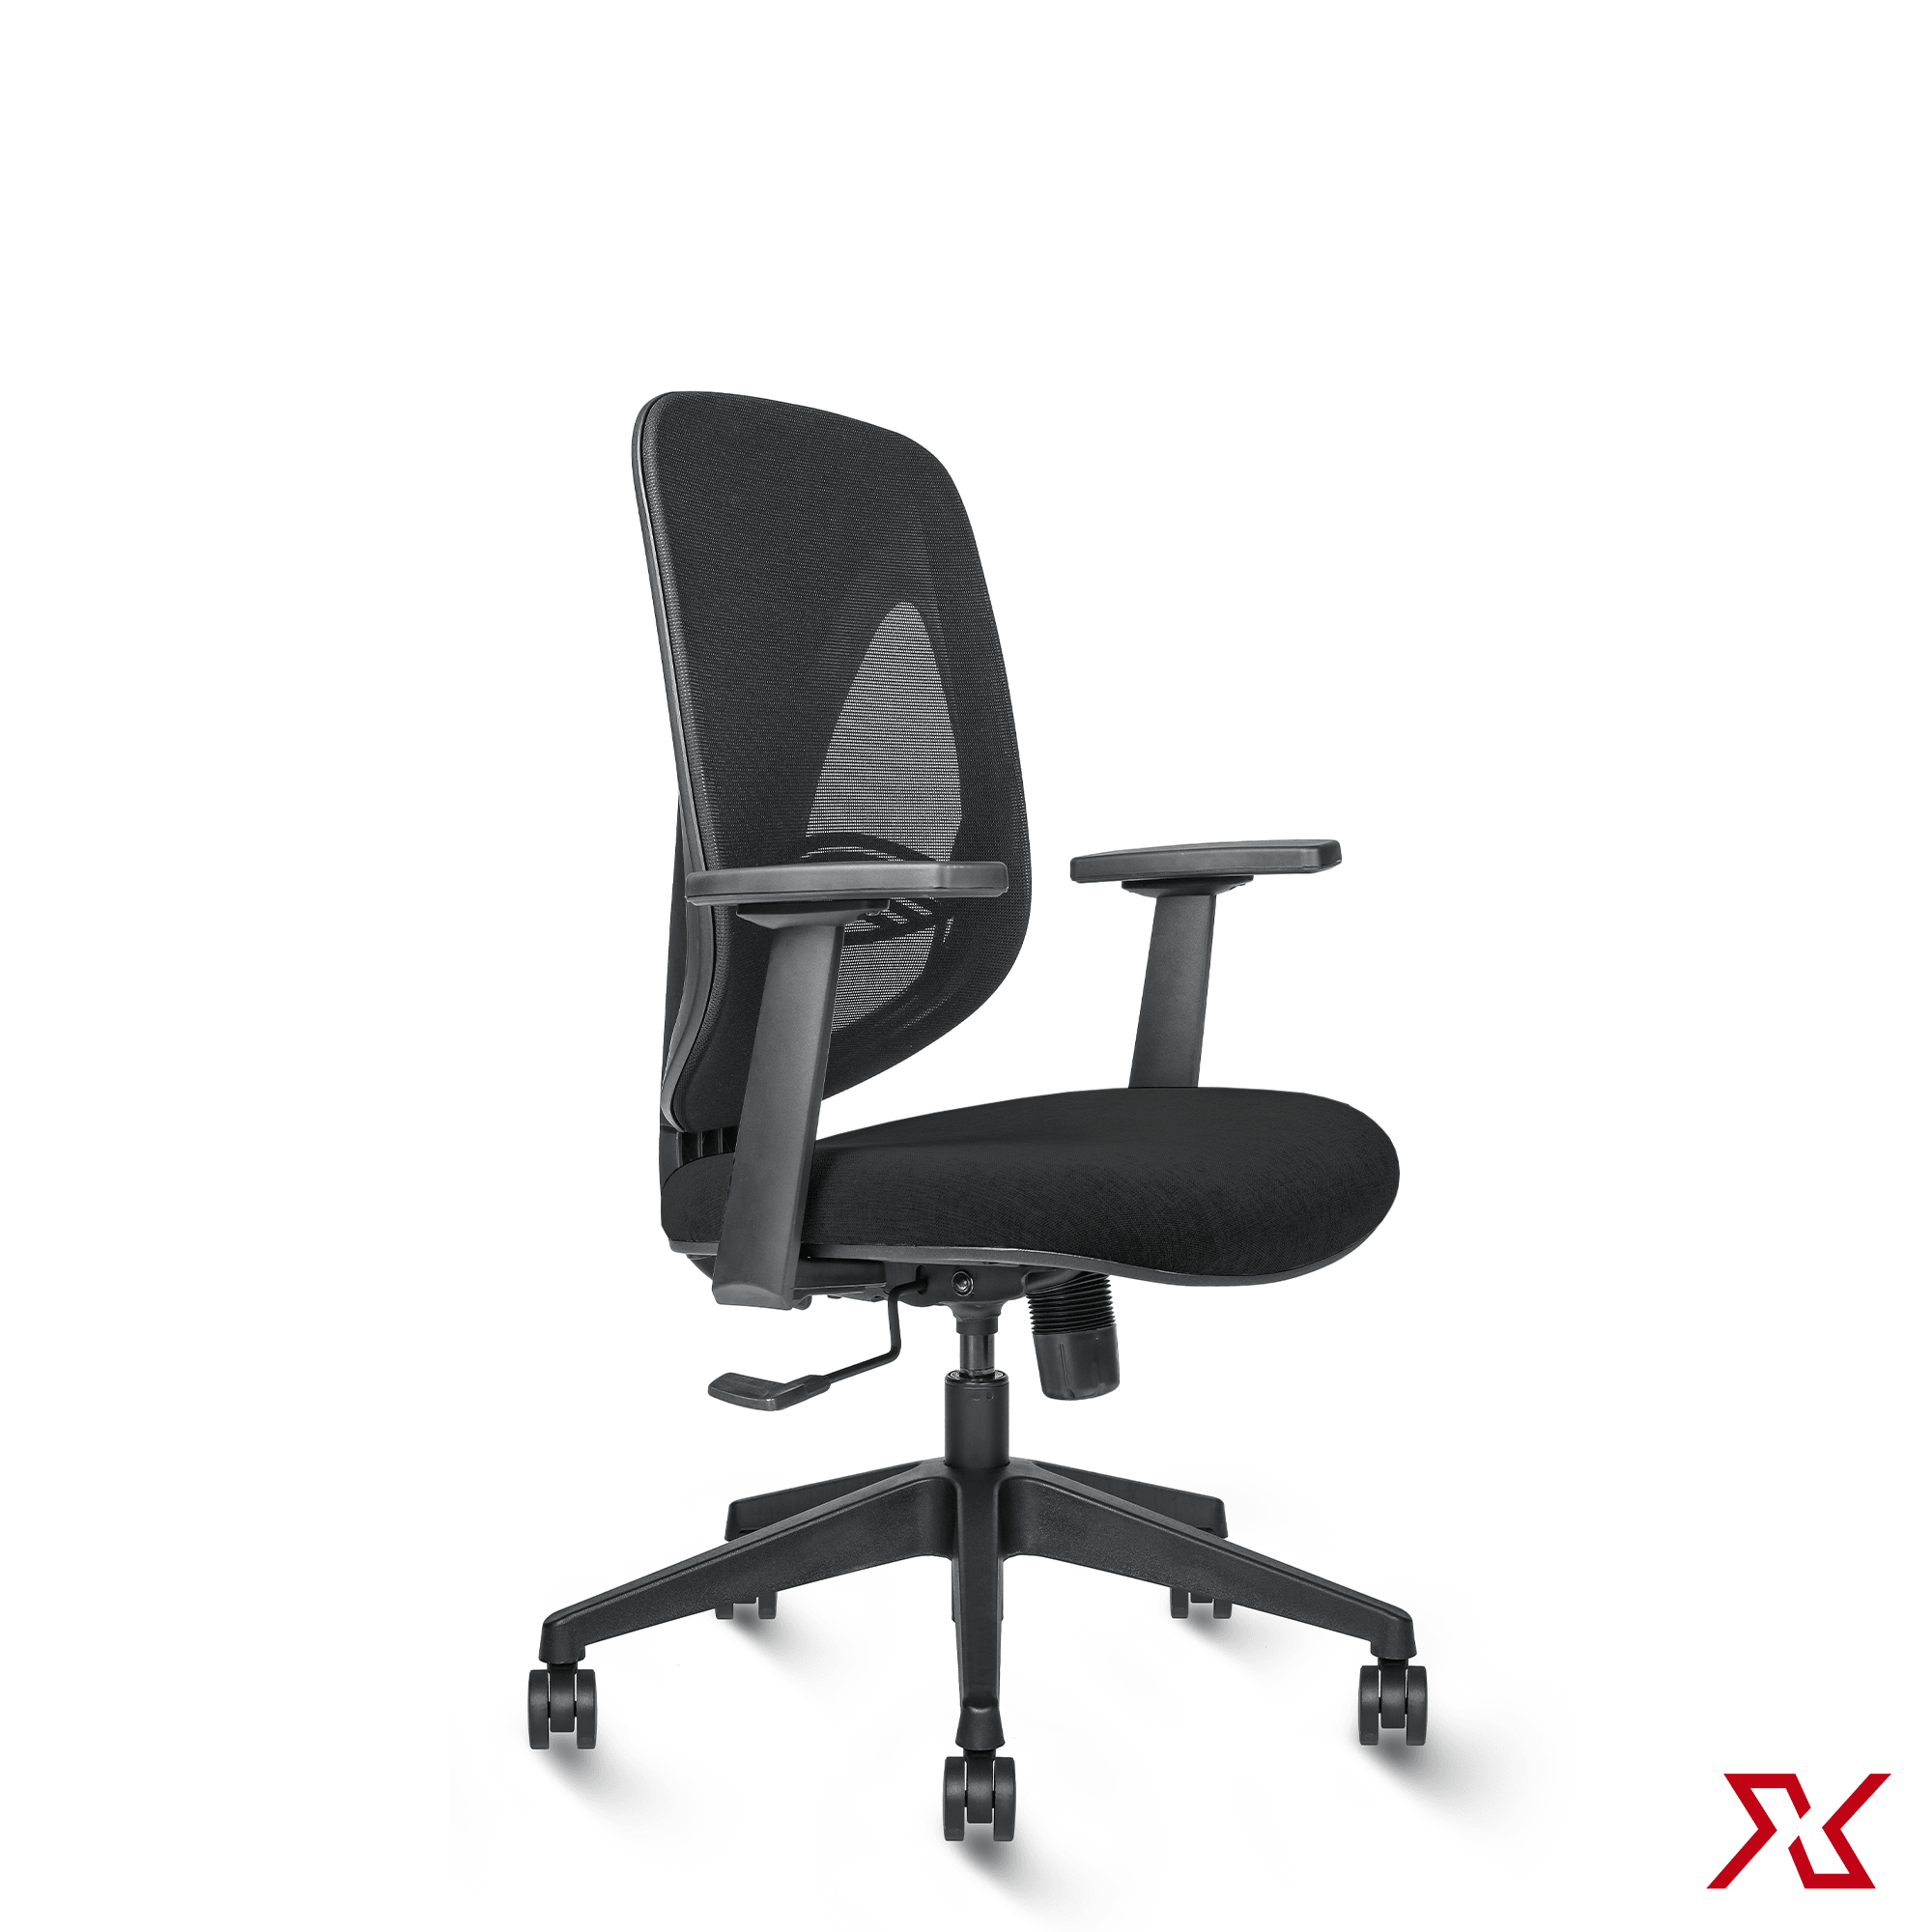 CLOUD Medium Back Fly (Black Chair) - Exclusiff Seating Sytems